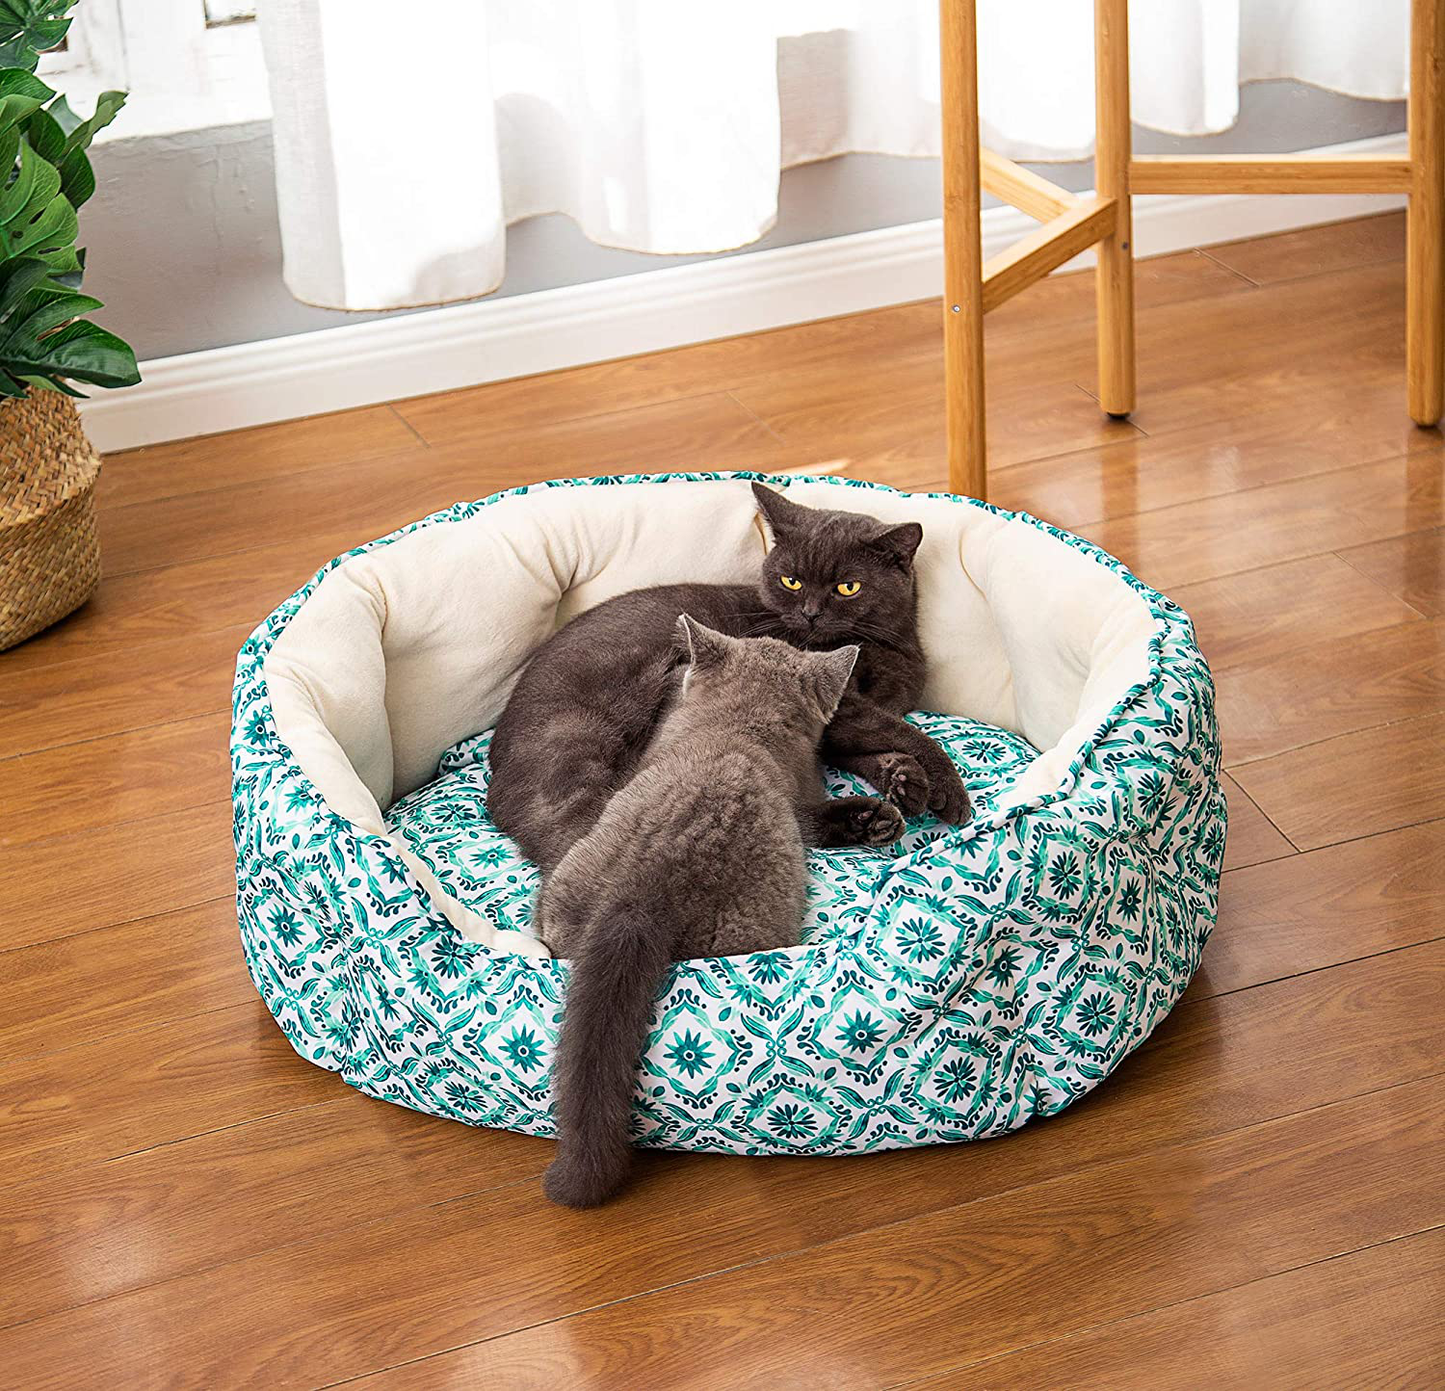 LUCKITTY Cat Bed,Soft Velvet & Waterproof Oxford Two-Sided Cushion, Easy Washable,Oval Geometric Pet Beds for Indoor Cats or Small Animas Animals & Pet Supplies > Pet Supplies > Cat Supplies > Cat Beds LUCKITTY Boho Green 25 Inch 